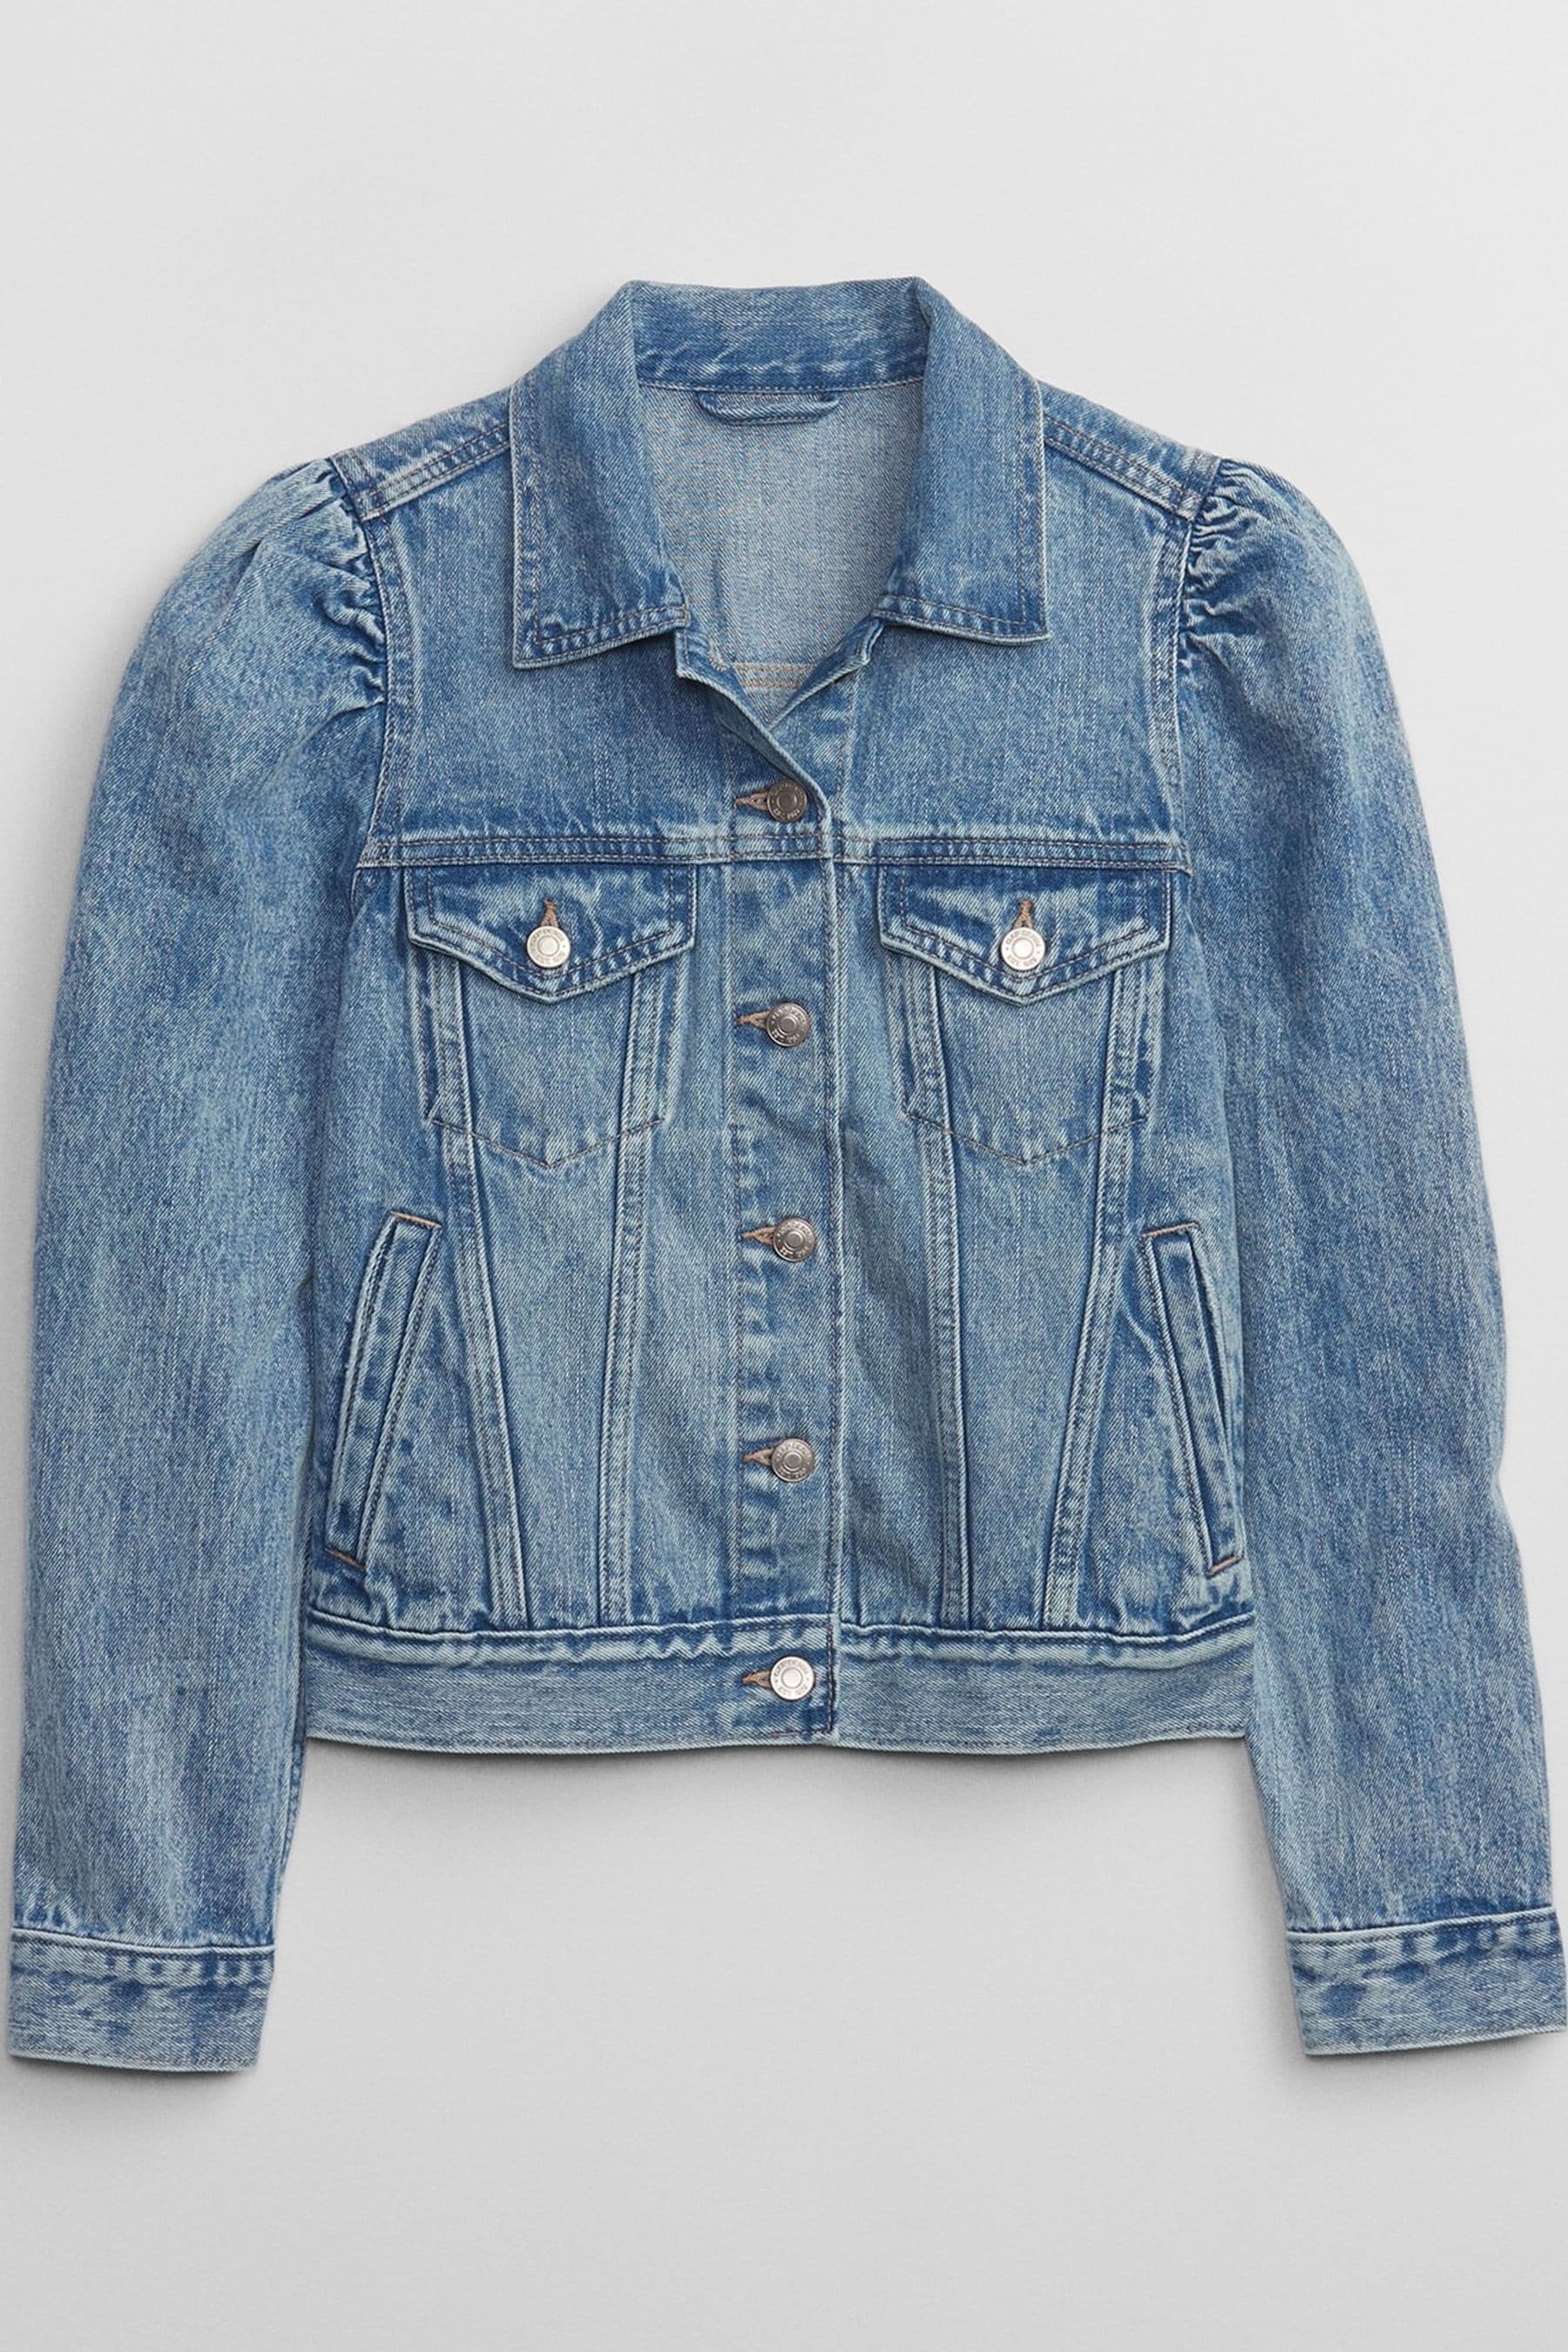 Buy Gap Blue Puff Sleeve Icon Denim Jacket from the Next UK online shop